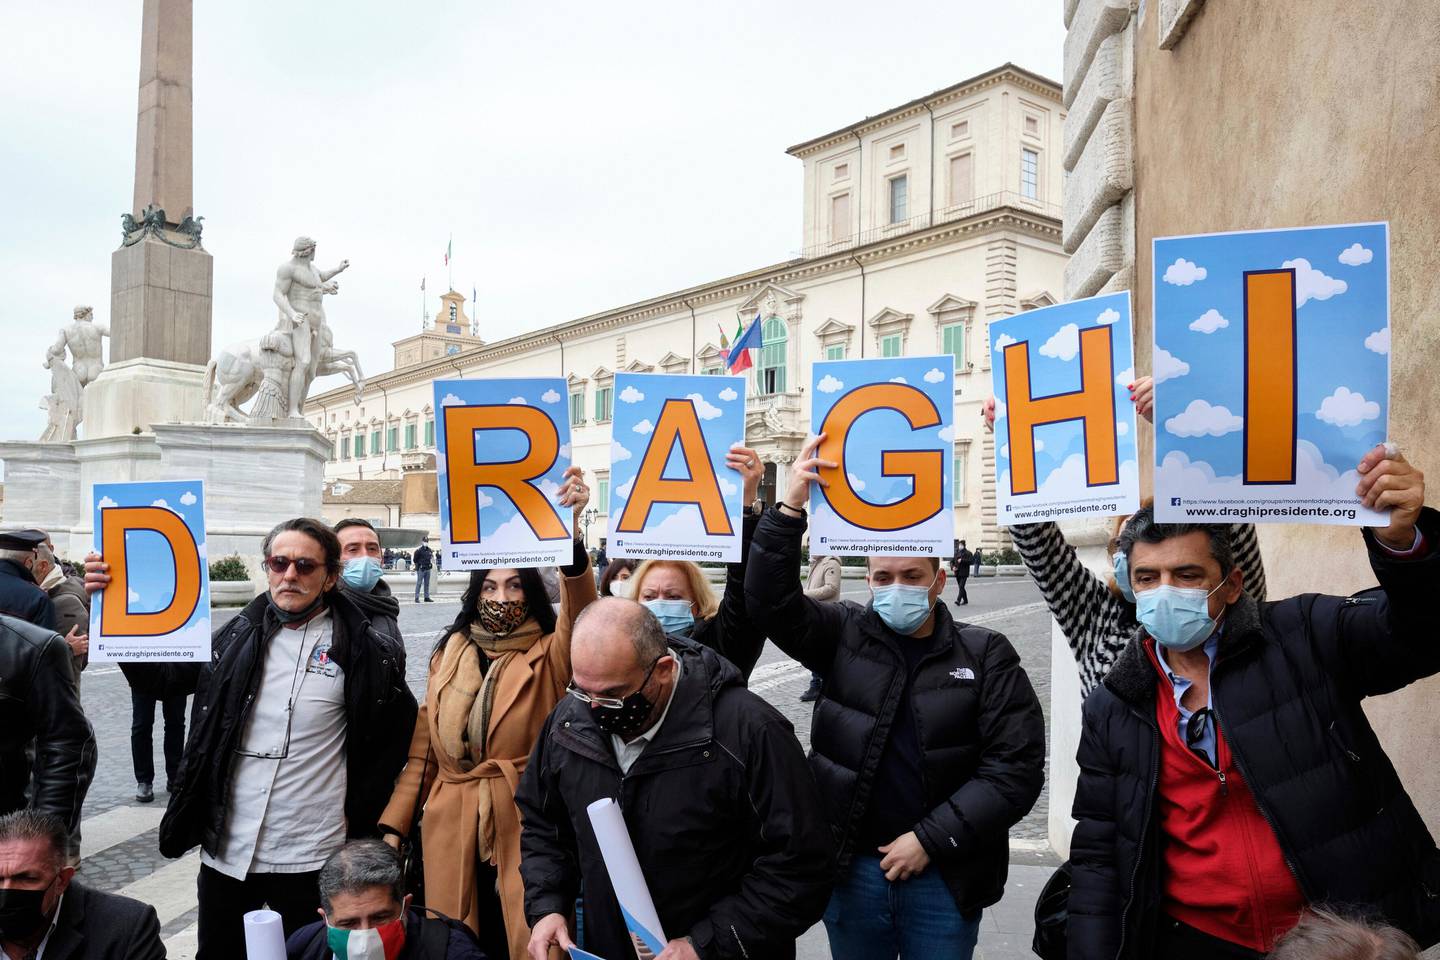 A group of supporters hold placards reading "Draghi President" in front of the Quirinale Presidential palace in Rome Wednesday, Feb. 3, 2021. Former European Central Bank President Mario Draghi arrived for talks with Italian President Sergio Mattarella to discuss a mandate to form a new government. (Mauro Scrobogna/LaPresse via AP)